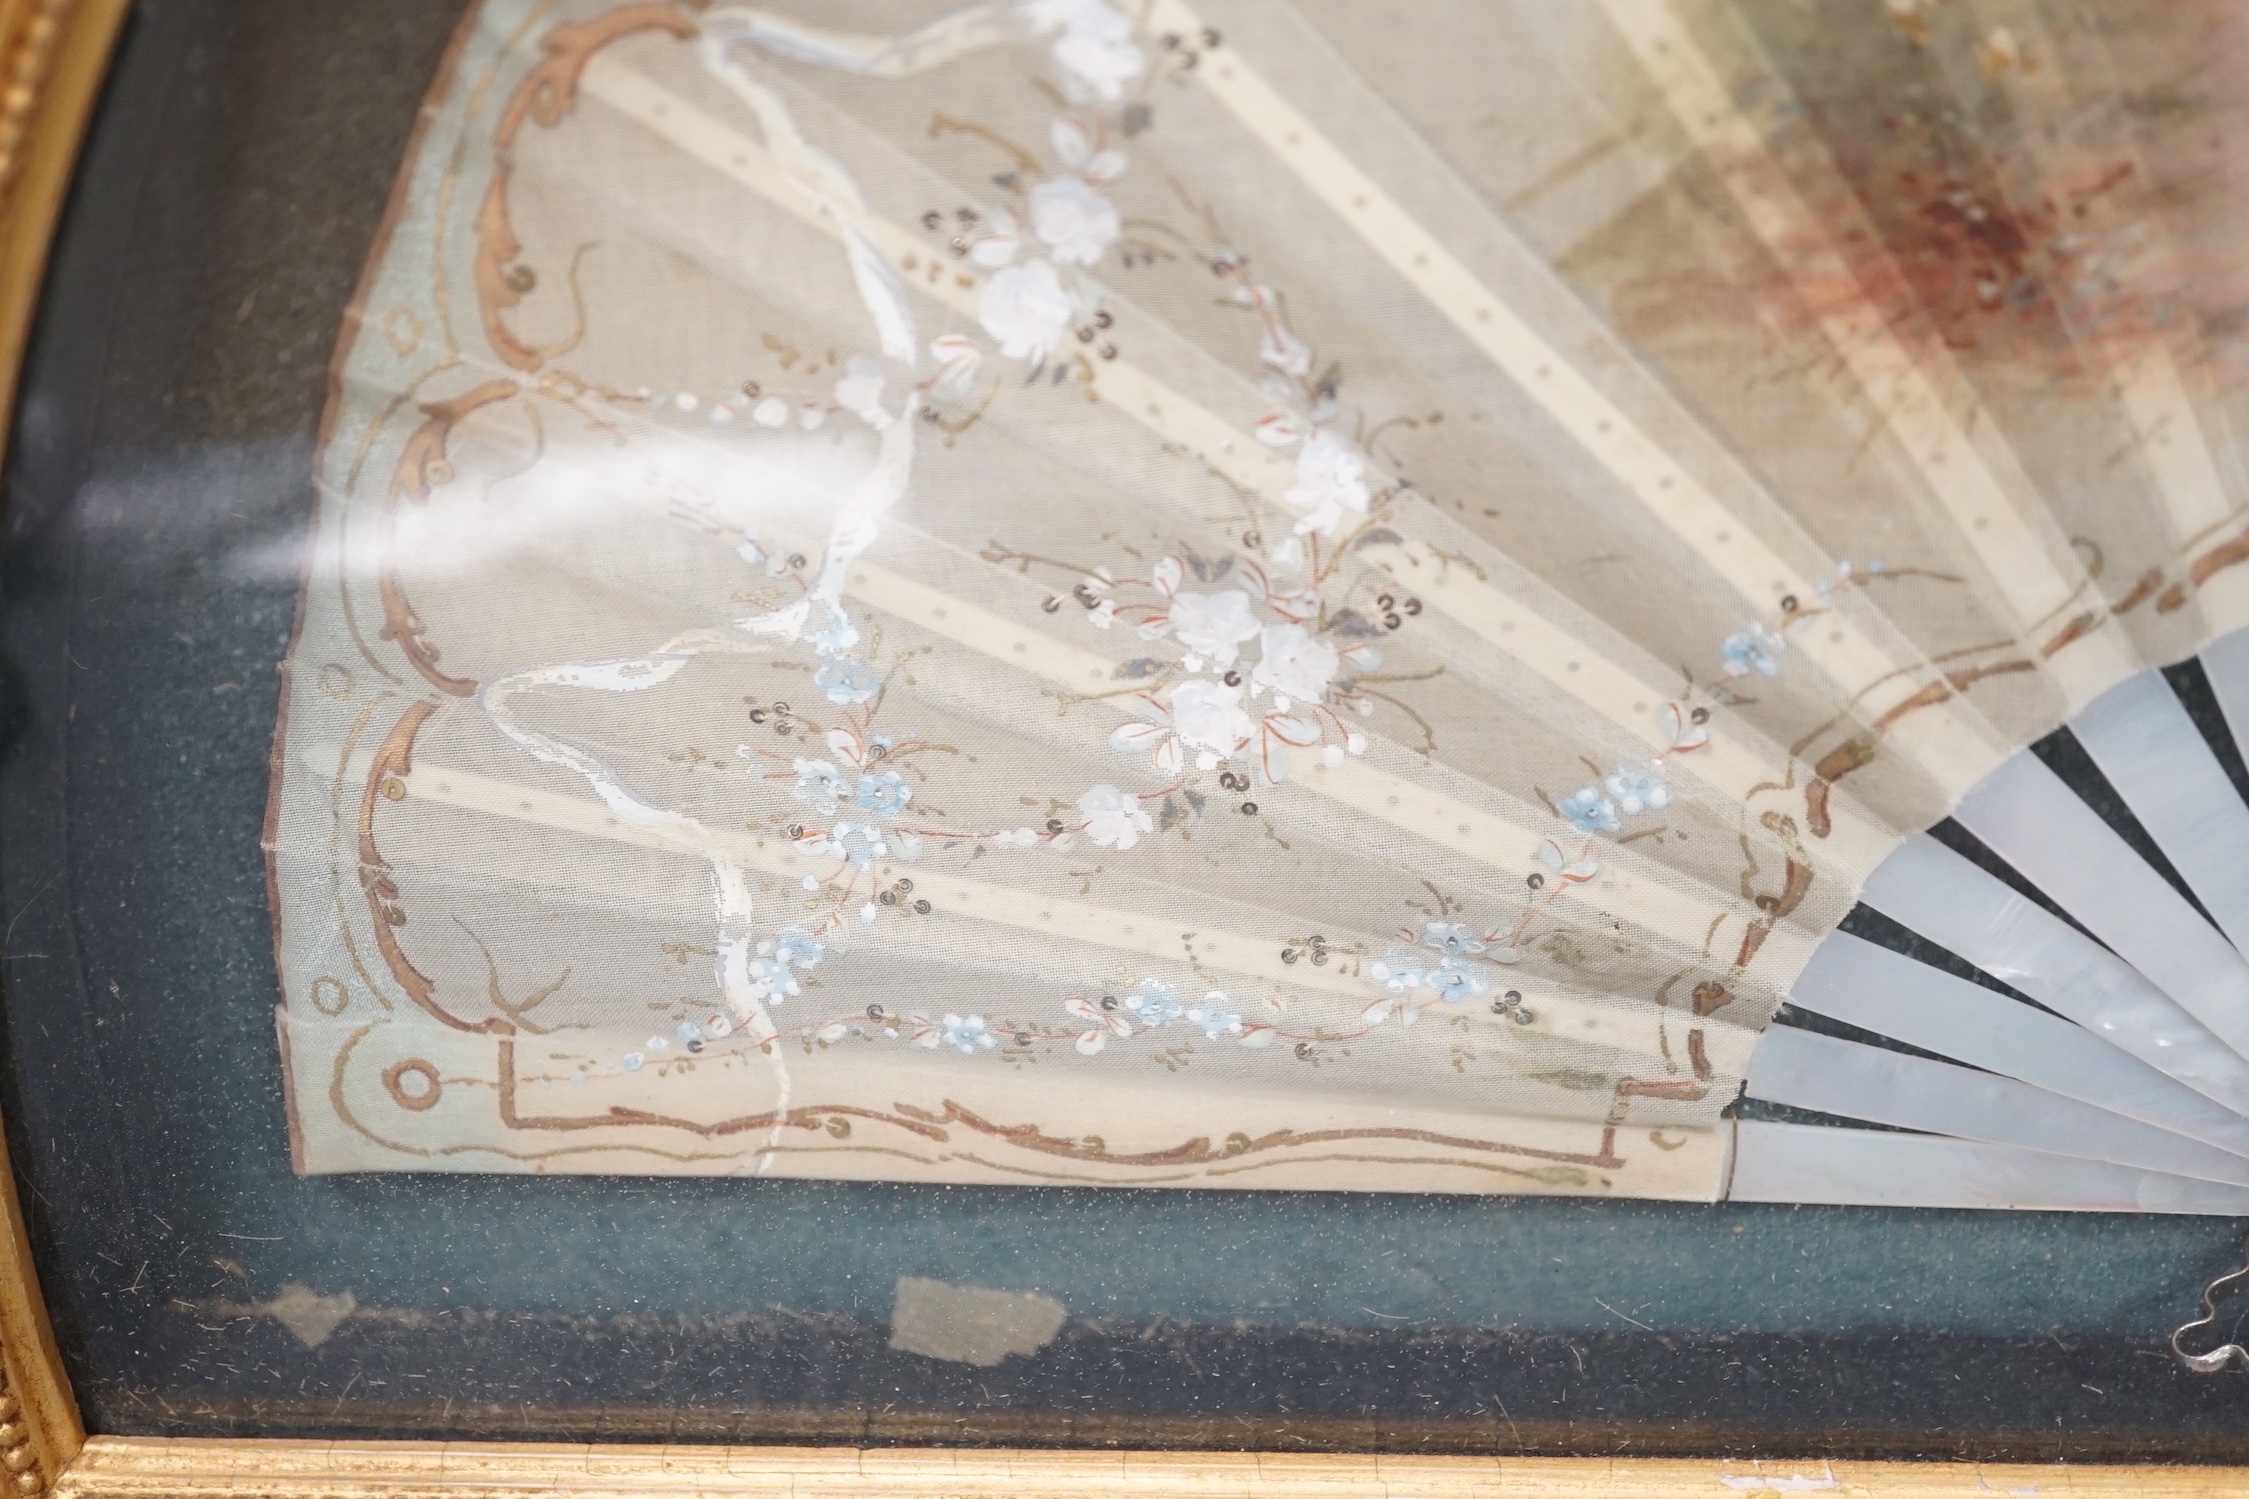 A framed Victorian figuratively painted fan with mother of pearl guards